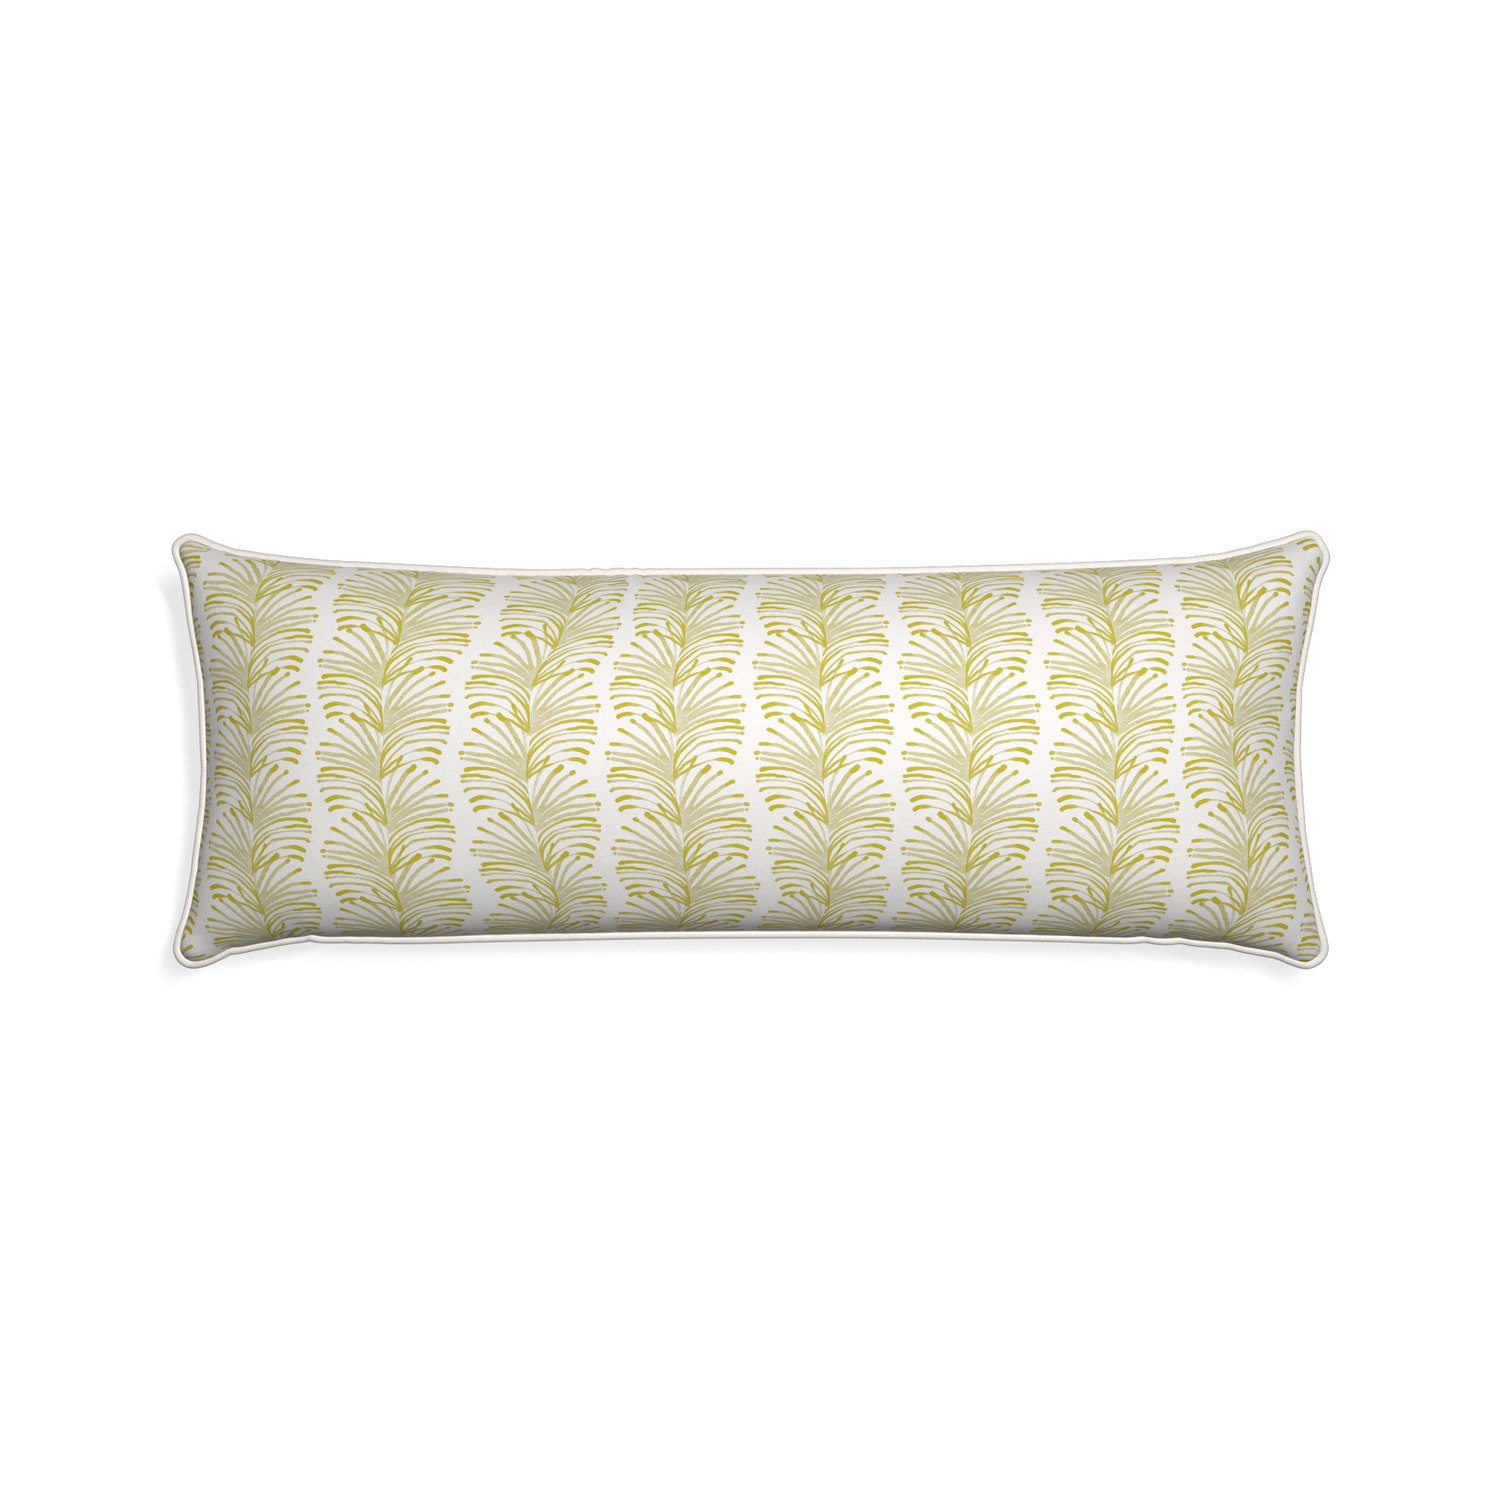 Xl-lumbar emma chartreuse custom pillow with snow piping on white background